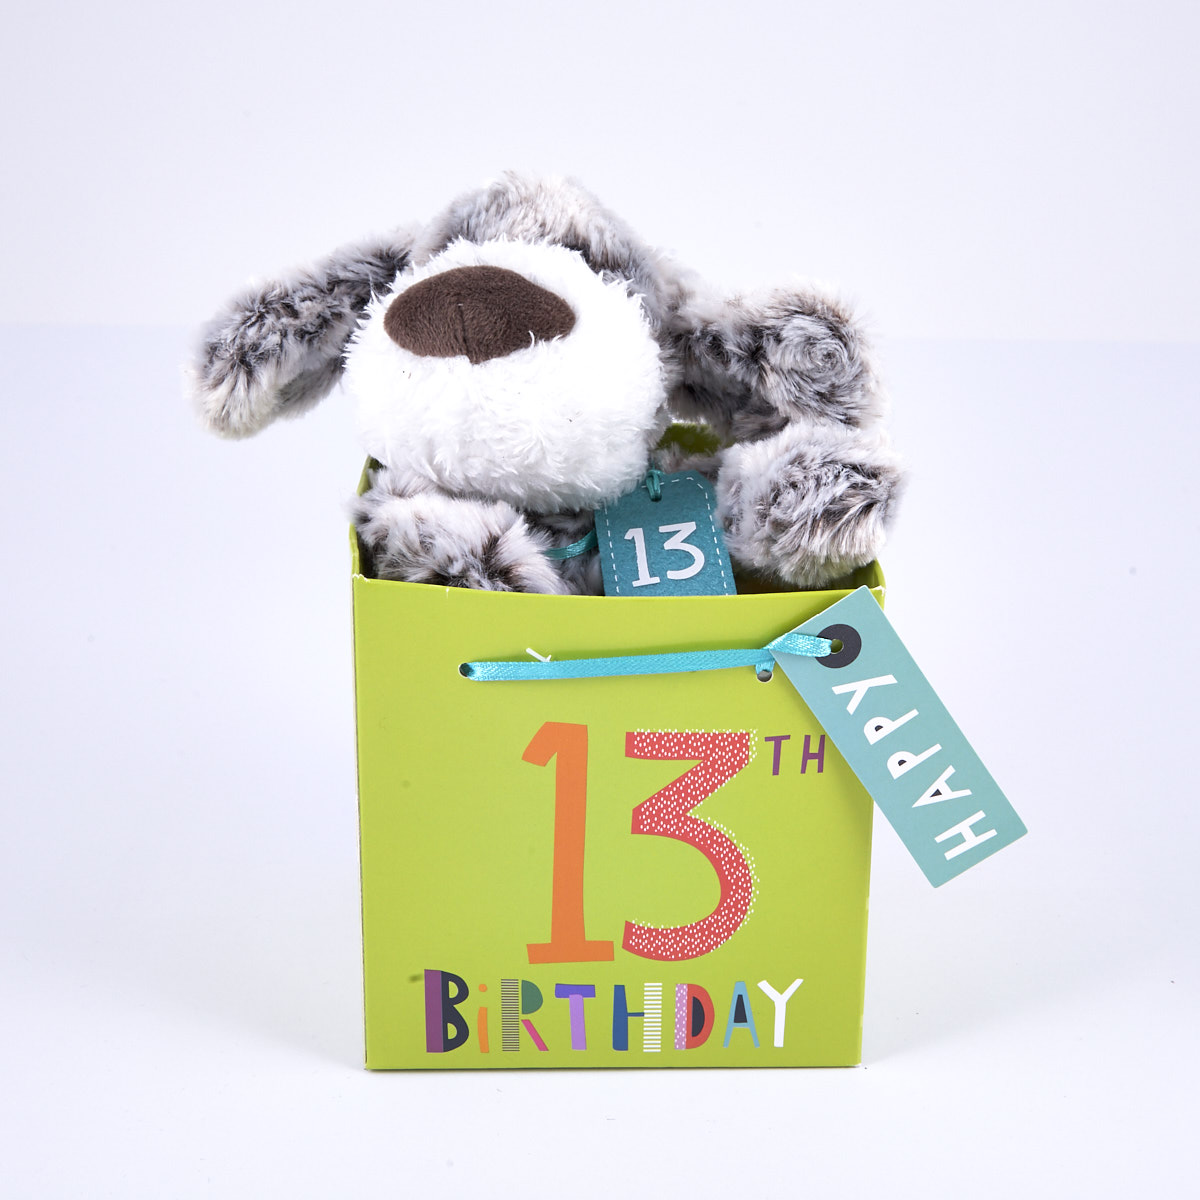 Buy 13th Birthday Grey & White Dog In Gift Bag for GBP 2